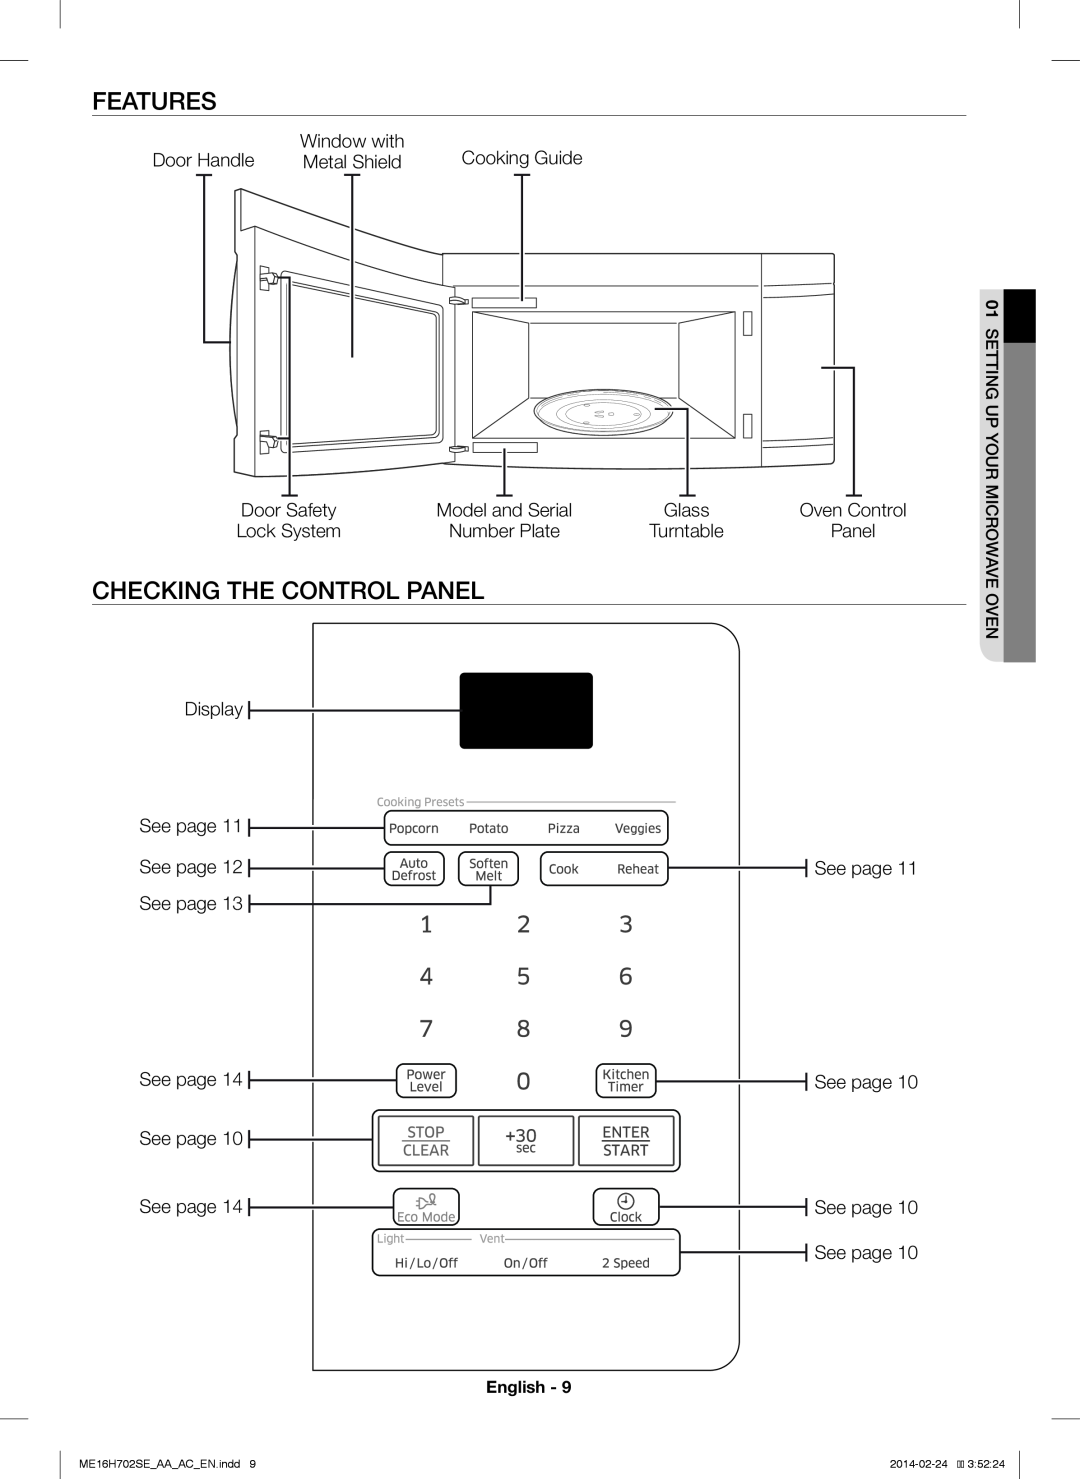 Samsung ME16H702SE user manual Features, Checking The Control Panel 